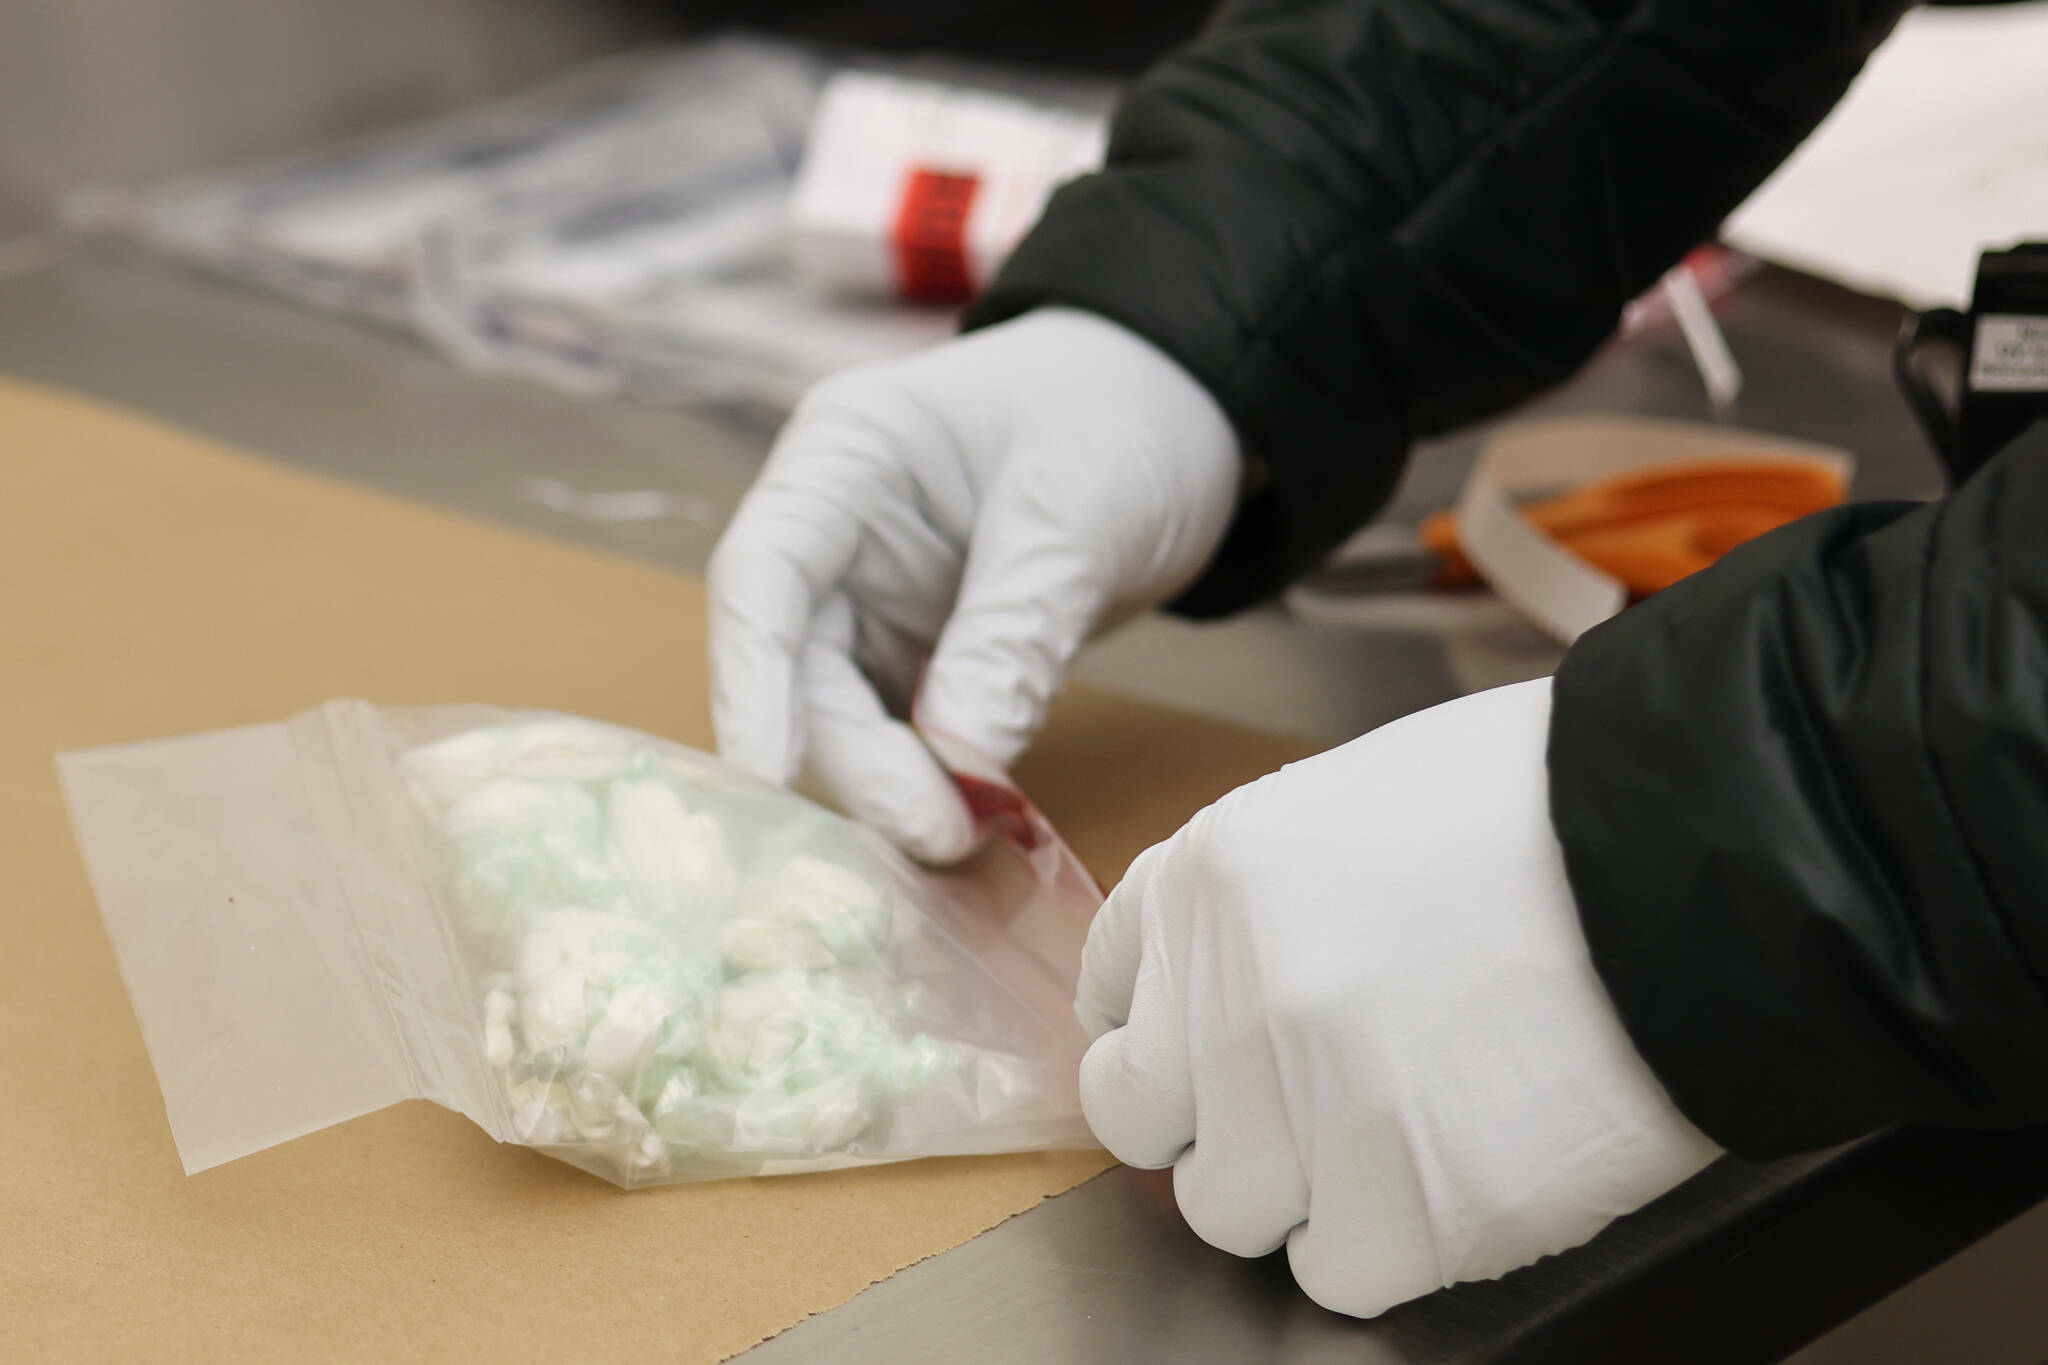 A tag is place on a evidence bag containing small baggies of drugs seized by the Juneau Police Department. (Ben Hohenstatt / Juneau Empire File)